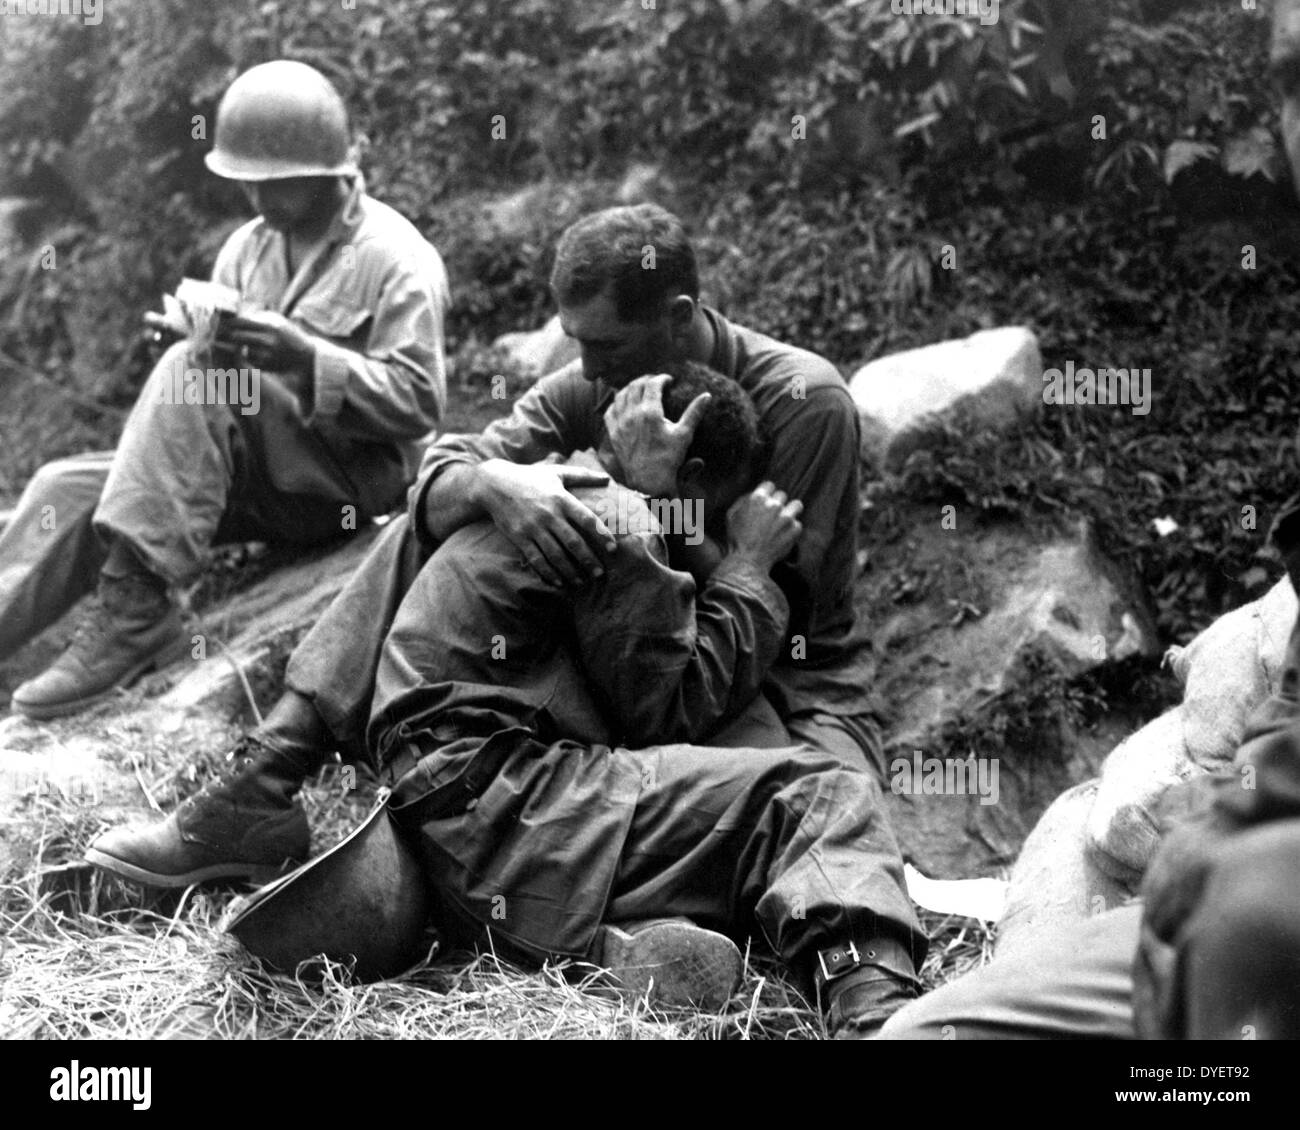 Korean War 1953. American soldier comforts another soldier in distress Stock Photo